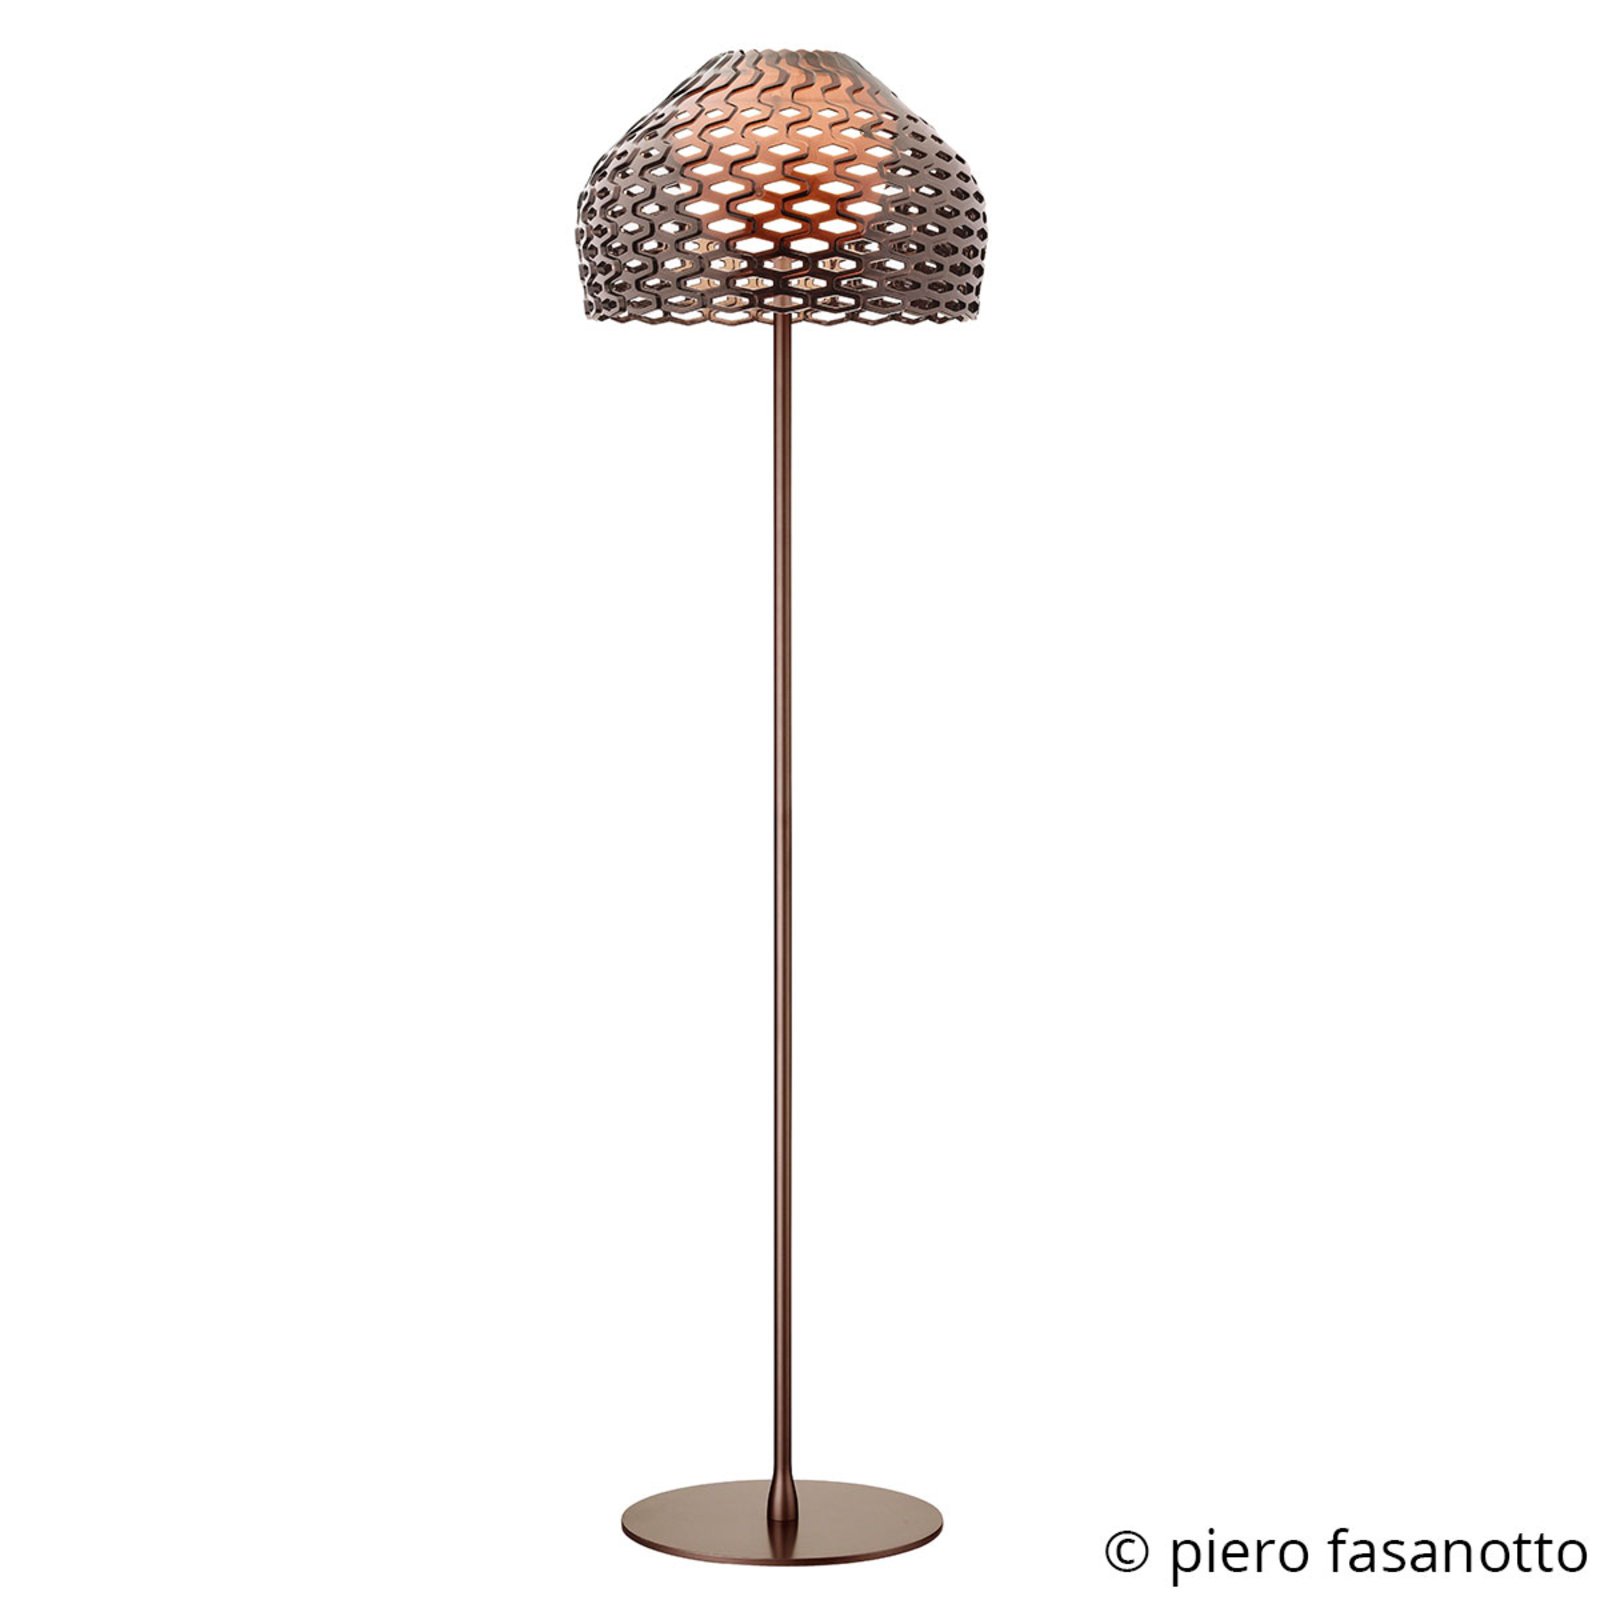 FLOS Tatou F floor lamp with dimmer, ochre grey